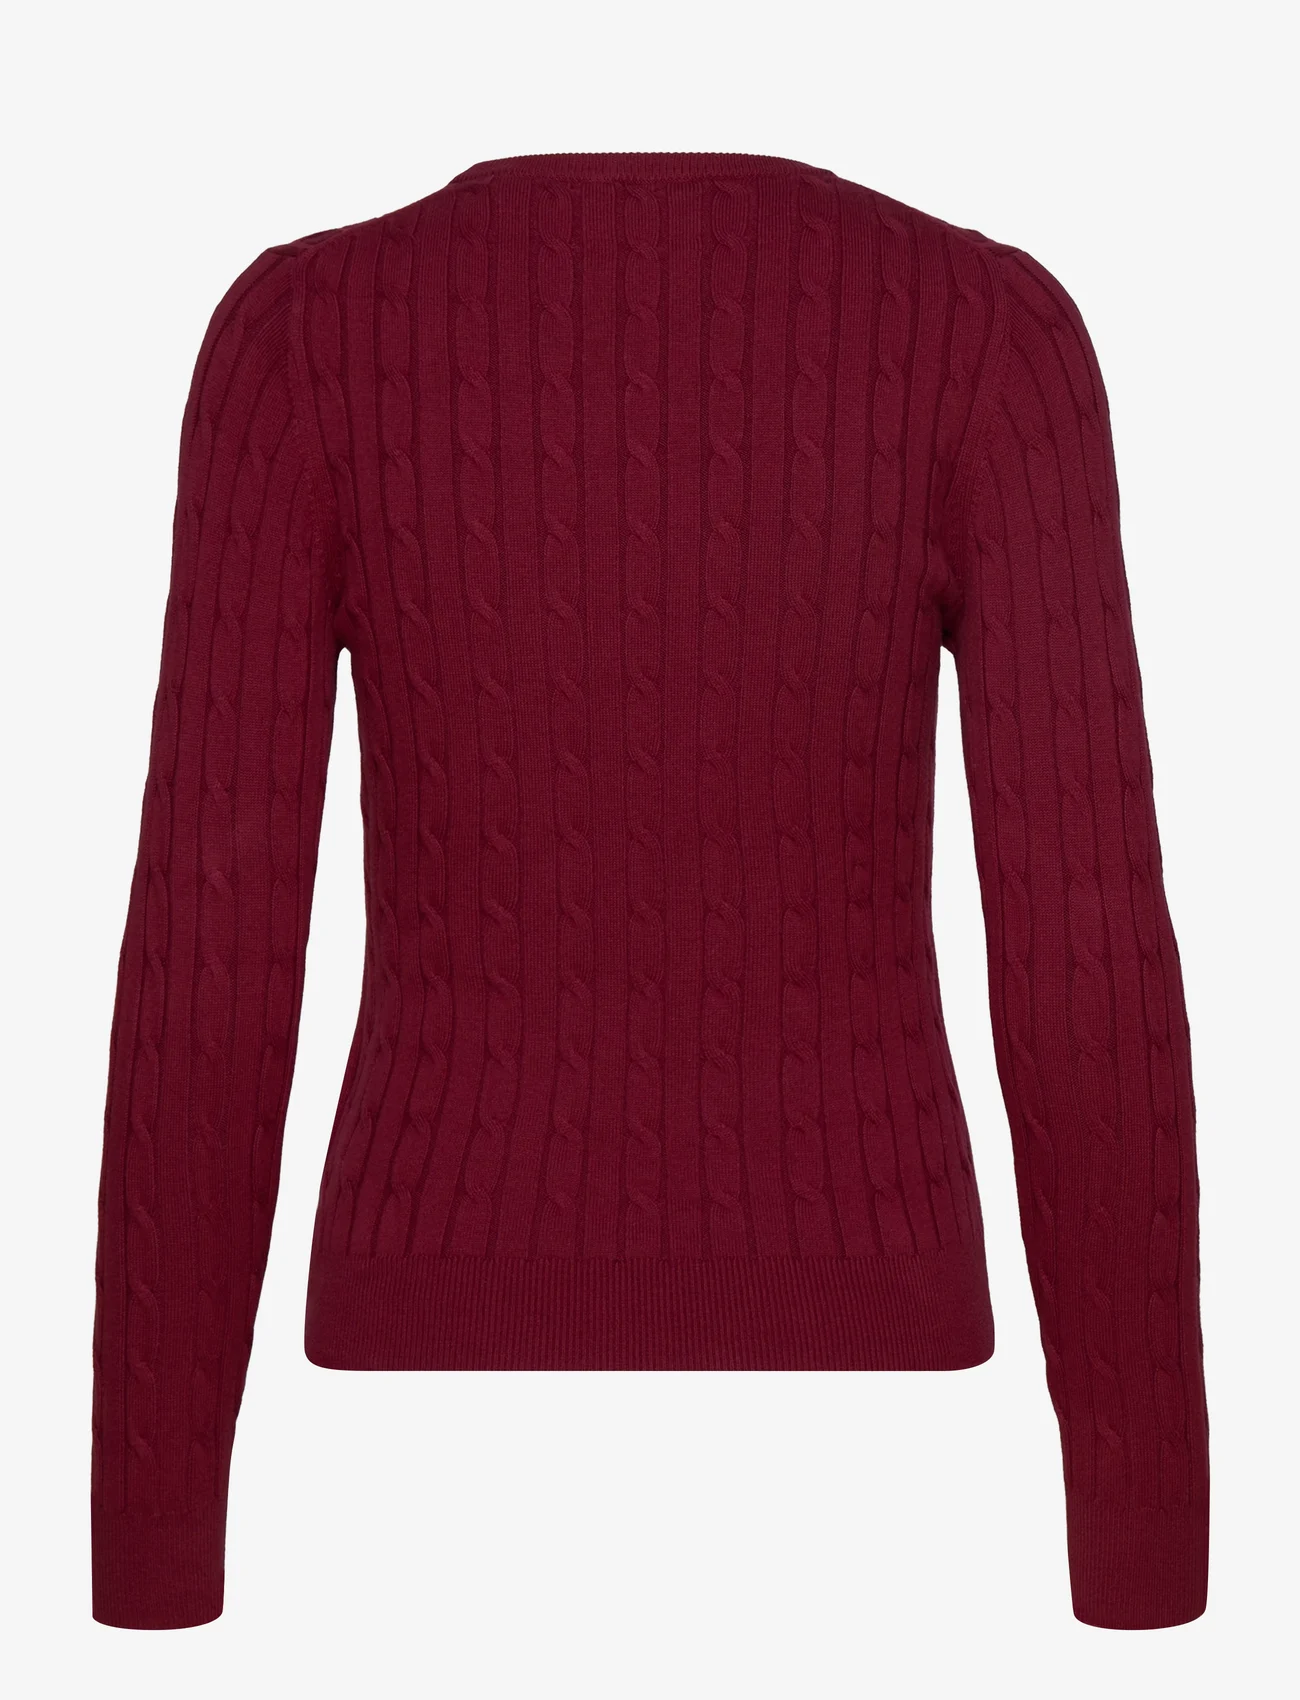 GANT - STRETCH COTTON CABLE C-NECK - pullover - plumped red - 1